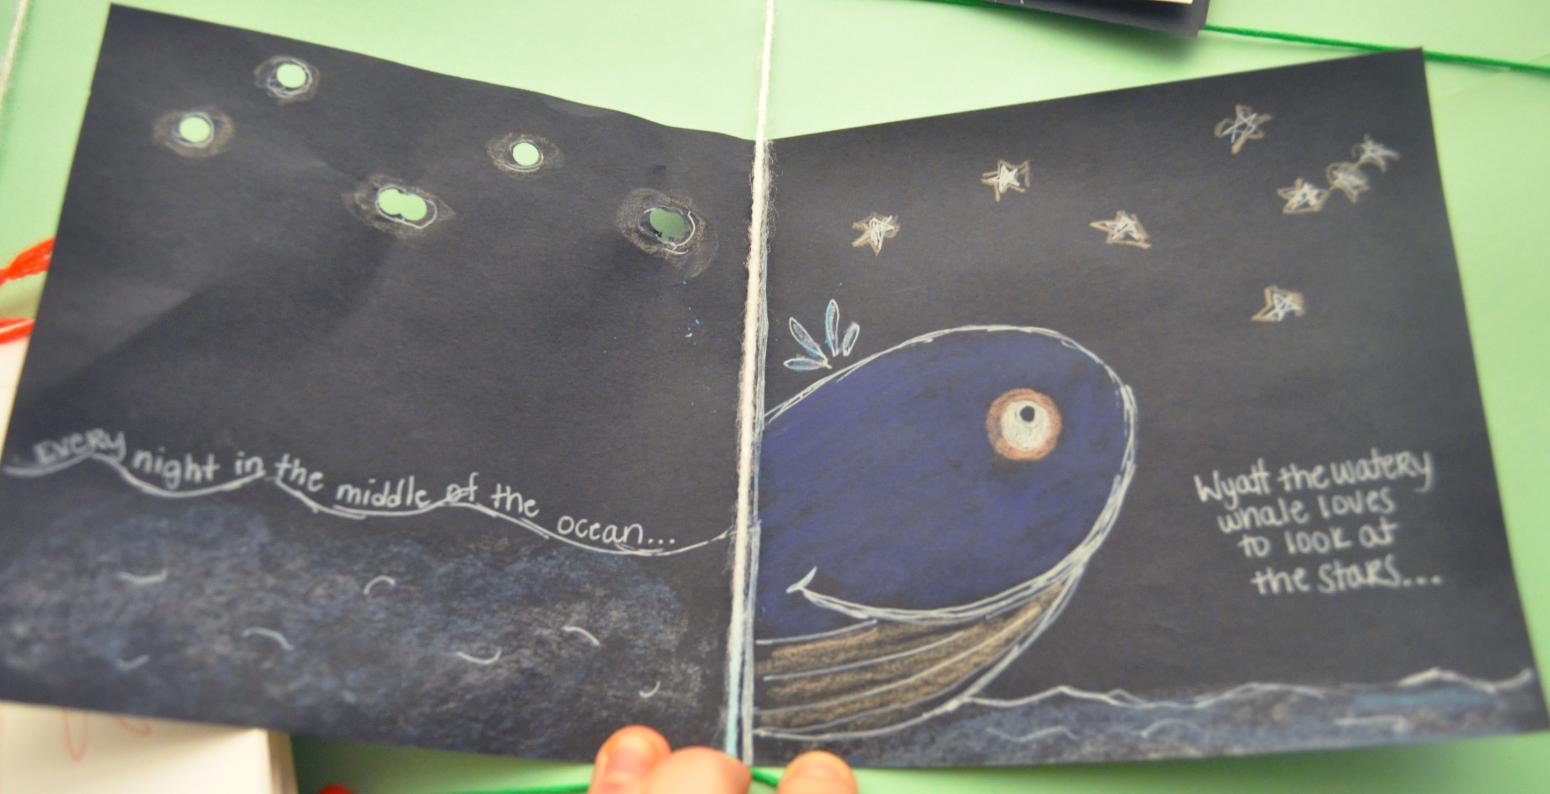 A book with a drawn whale named Wyatt who is looking out into a night sky with stars.